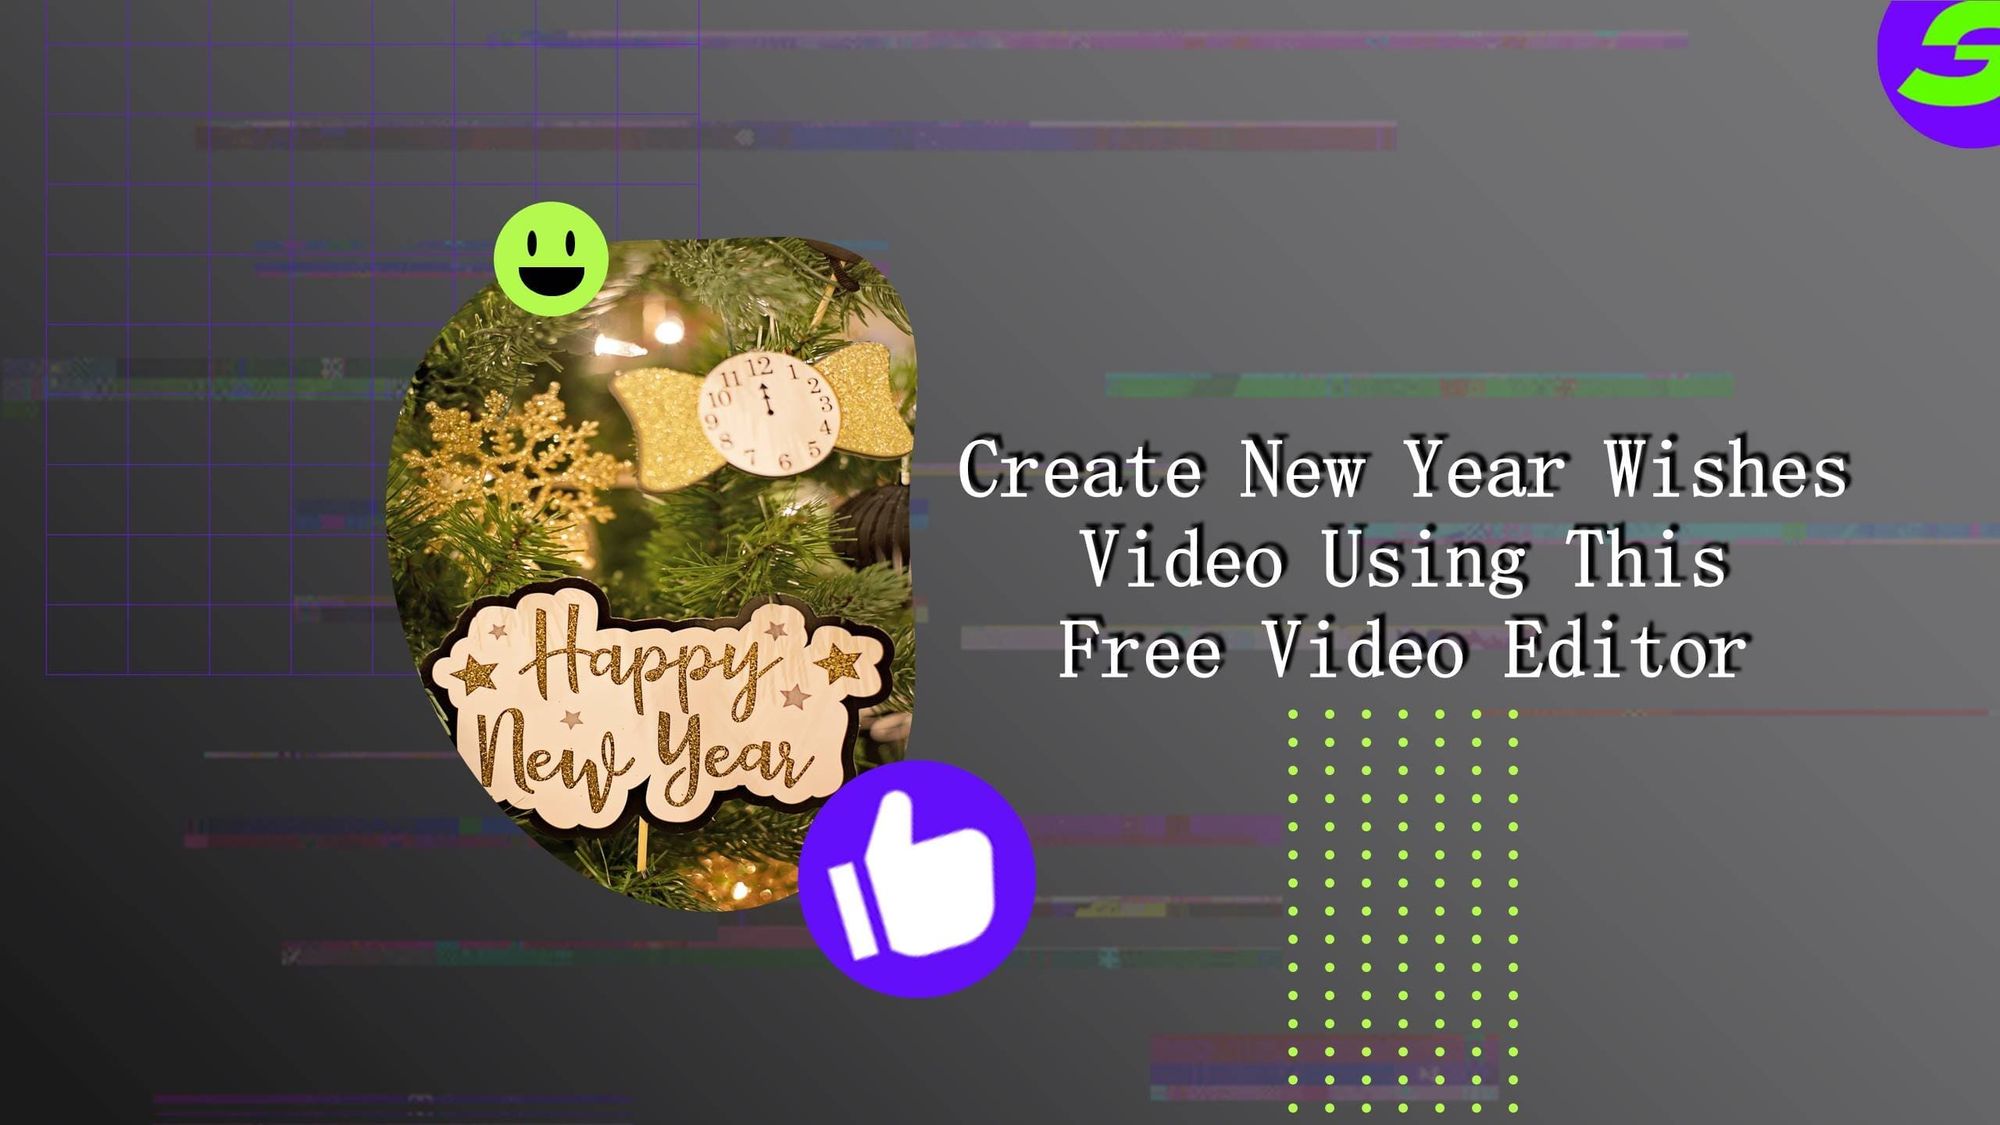 New Year Greetings Video using ShotCut Free Video Editor for Android